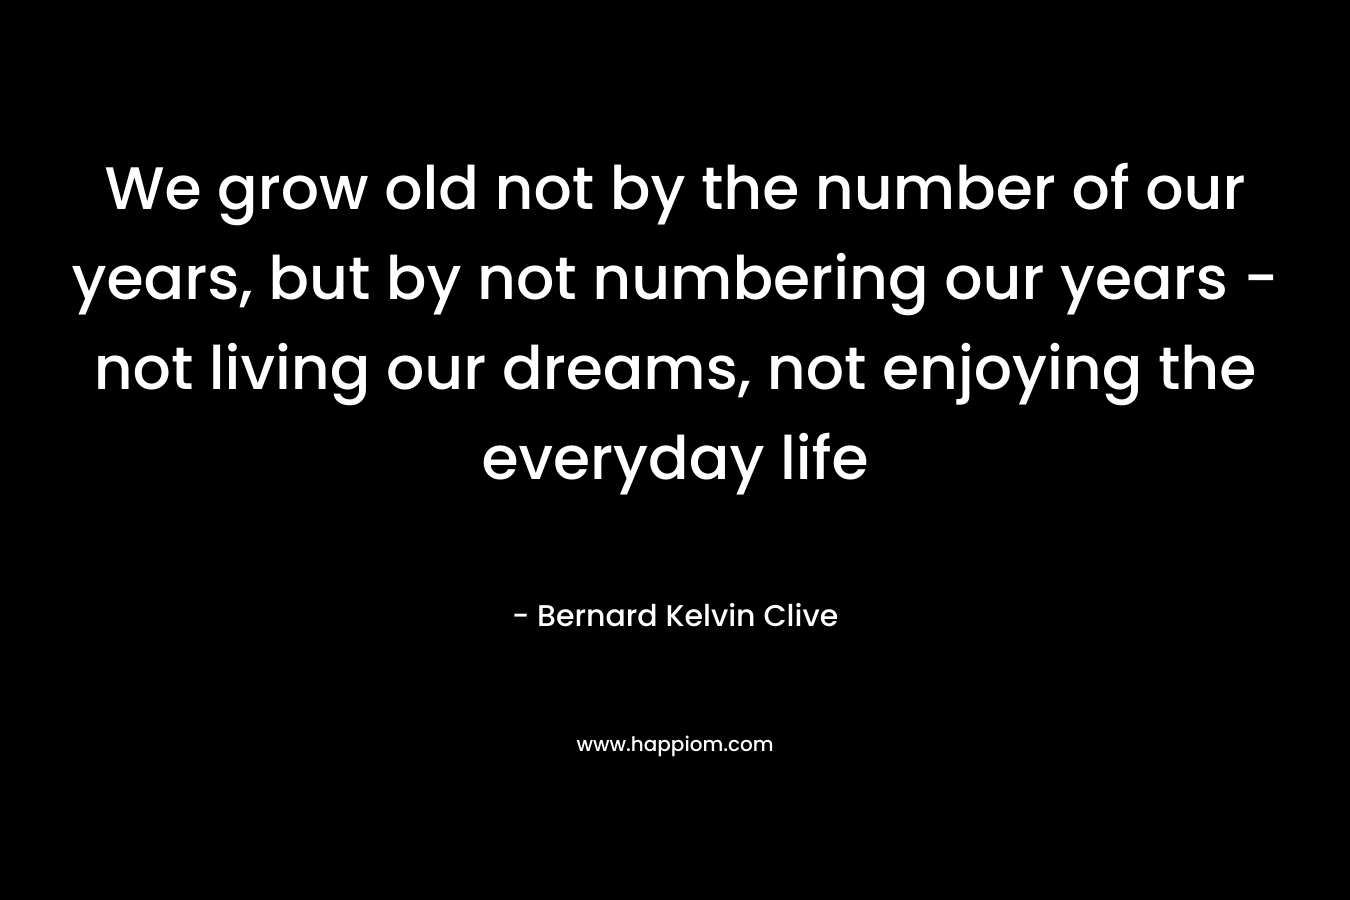 We grow old not by the number of our years, but by not numbering our years - not living our dreams, not enjoying the everyday life